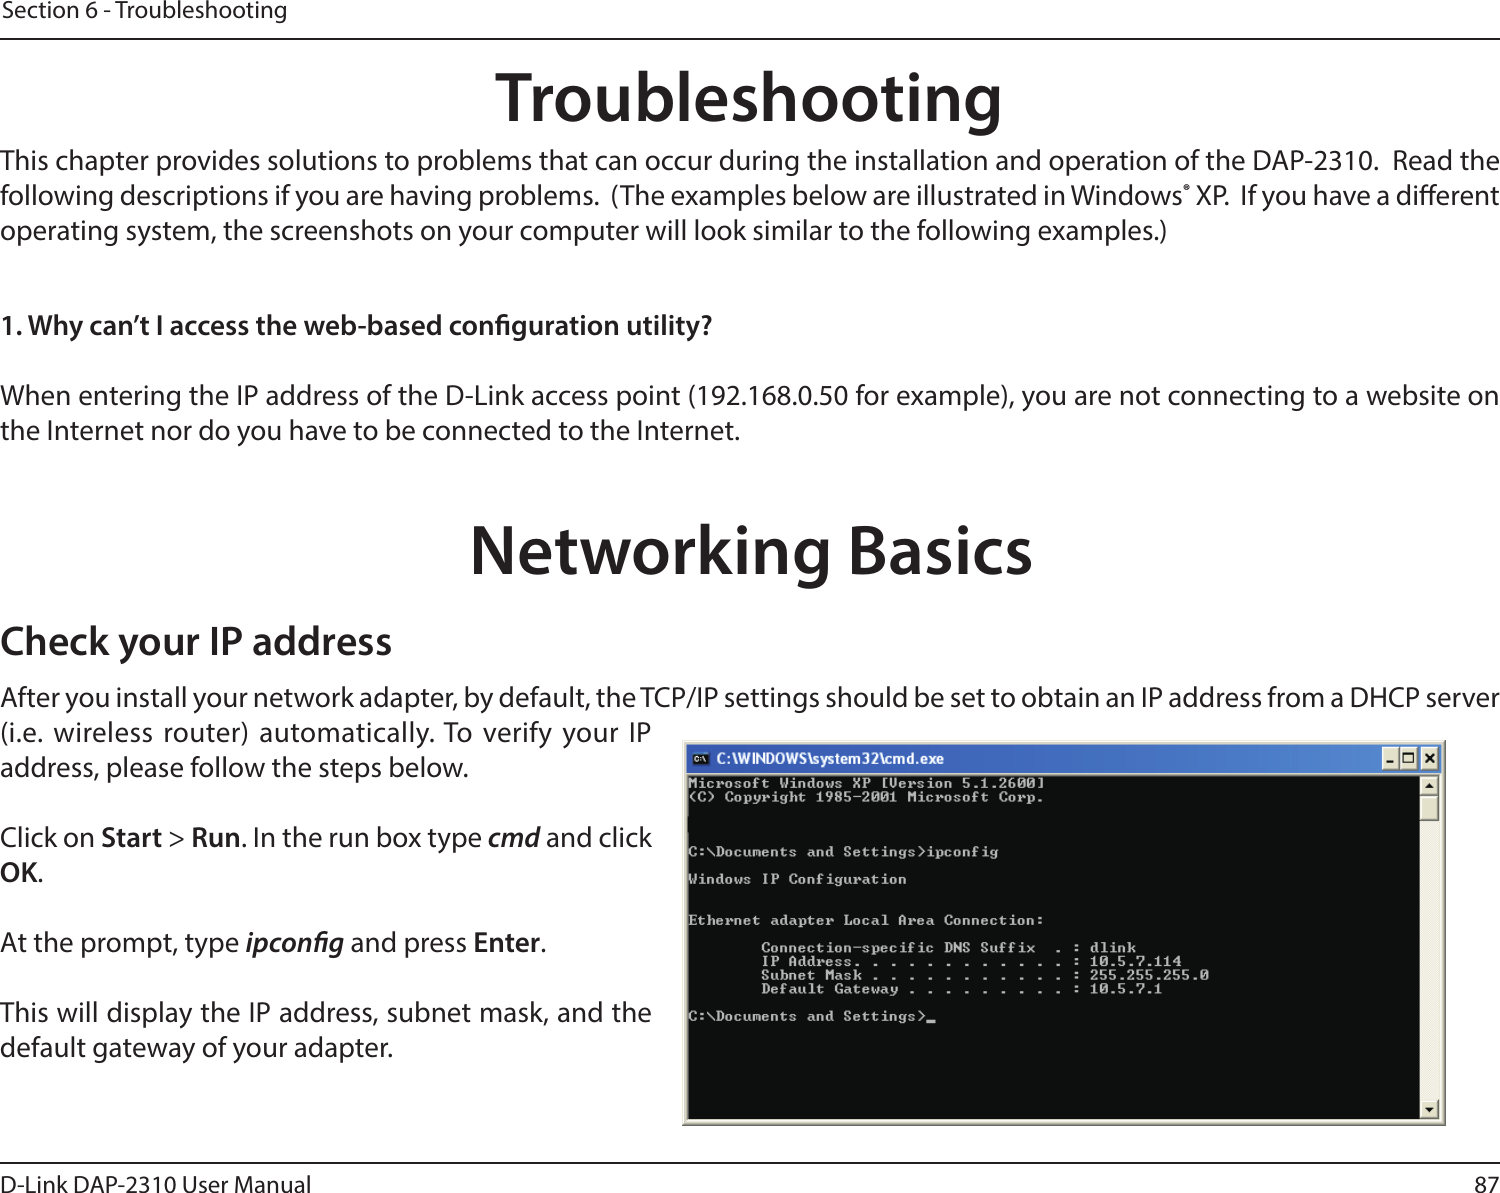 87D-Link DAP-2310 User ManualSection 6 - TroubleshootingTroubleshootingThis chapter provides solutions to problems that can occur during the installation and operation of the DAP-2310.  Read the following descriptions if you are having problems.  (The examples below are illustrated in Windows® XP.  If you have a dierent operating system, the screenshots on your computer will look similar to the following examples.)1. Why can’t I access the web-based conguration utility?When entering the IP address of the D-Link access point (192.168.0.50 for example), you are not connecting to a website on the Internet nor do you have to be connected to the Internet. Networking BasicsCheck your IP addressAfter you install your network adapter, by default, the TCP/IP settings should be set to obtain an IP address from a DHCP server (i.e. wireless router) automatically. To verify your IP address, please follow the steps below.Click on Start &gt; Run. In the run box type cmd and click OK.At the prompt, type ipcong and press Enter.This will display the IP address, subnet mask, and the default gateway of your adapter.